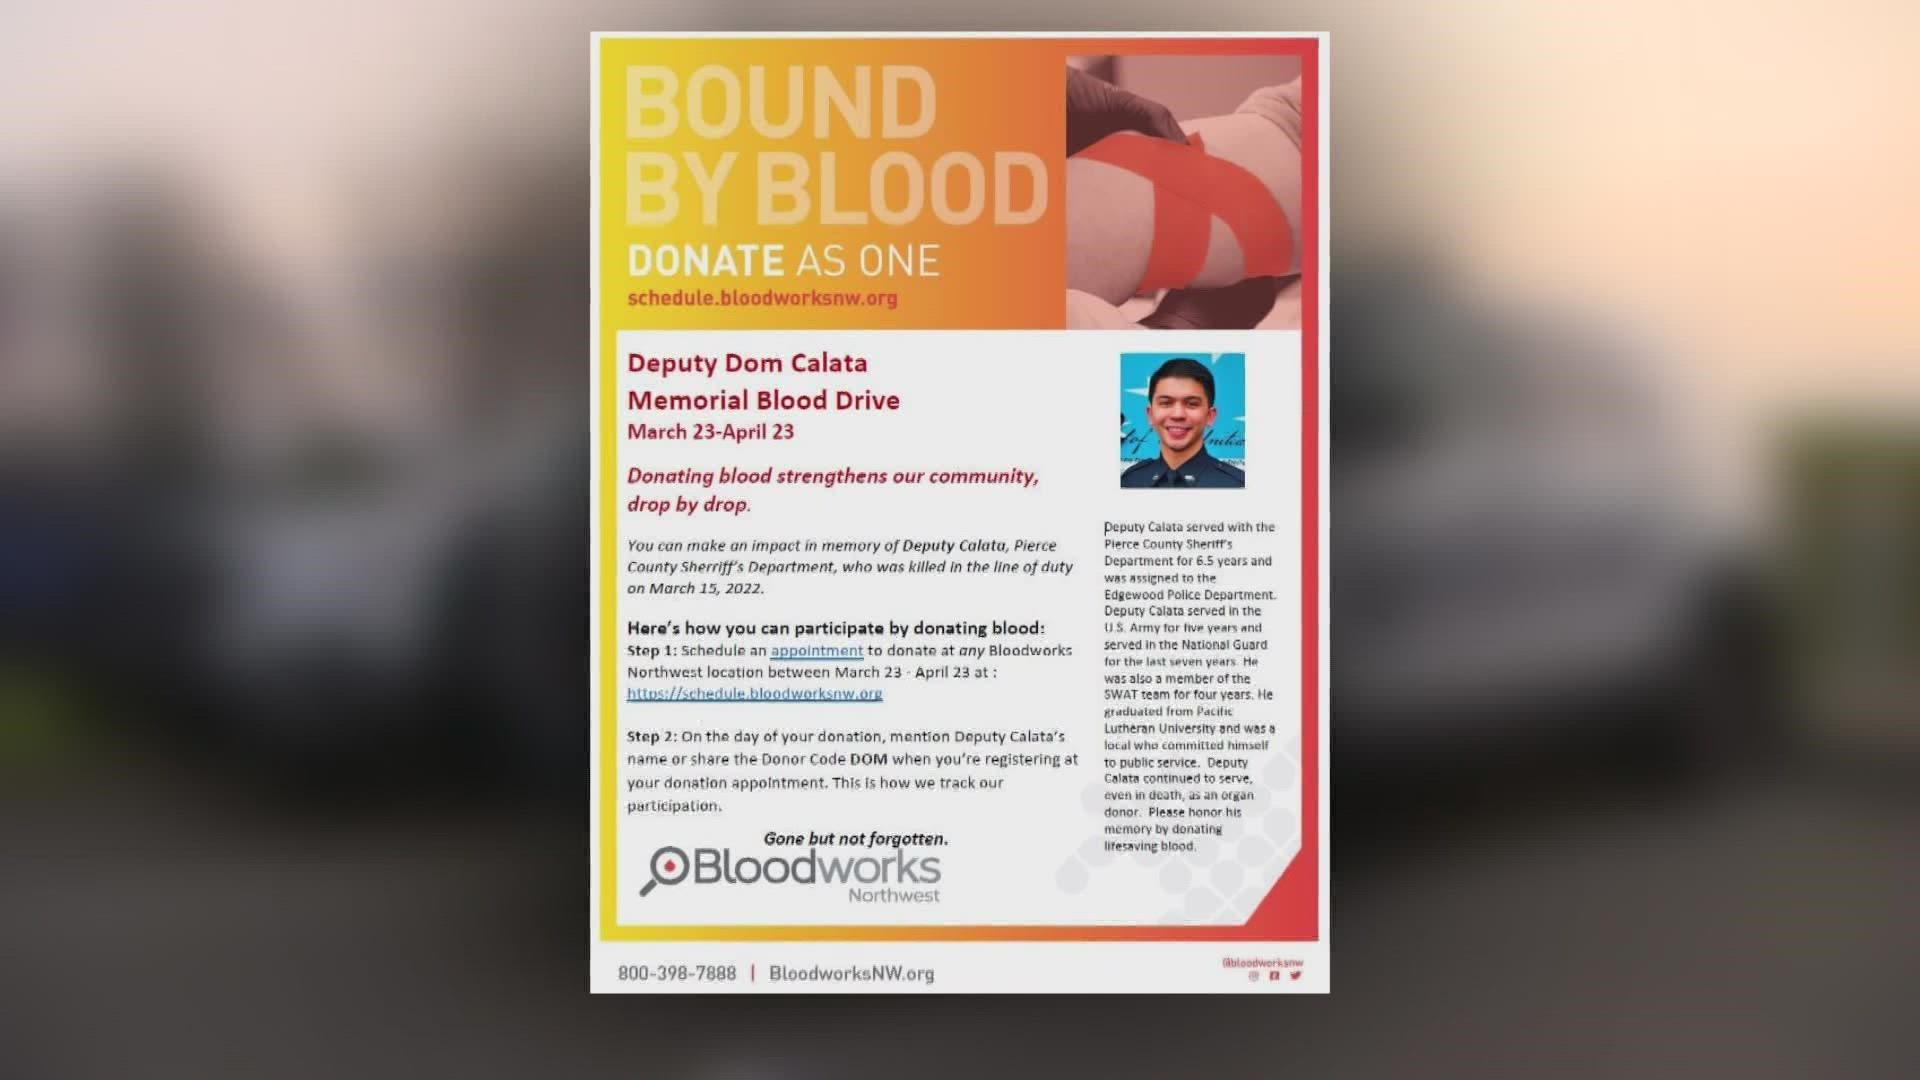 People can participate in the Deputy Dom Calata Memorial Blood Drive at any Bloodworks Northwest location until April 23.